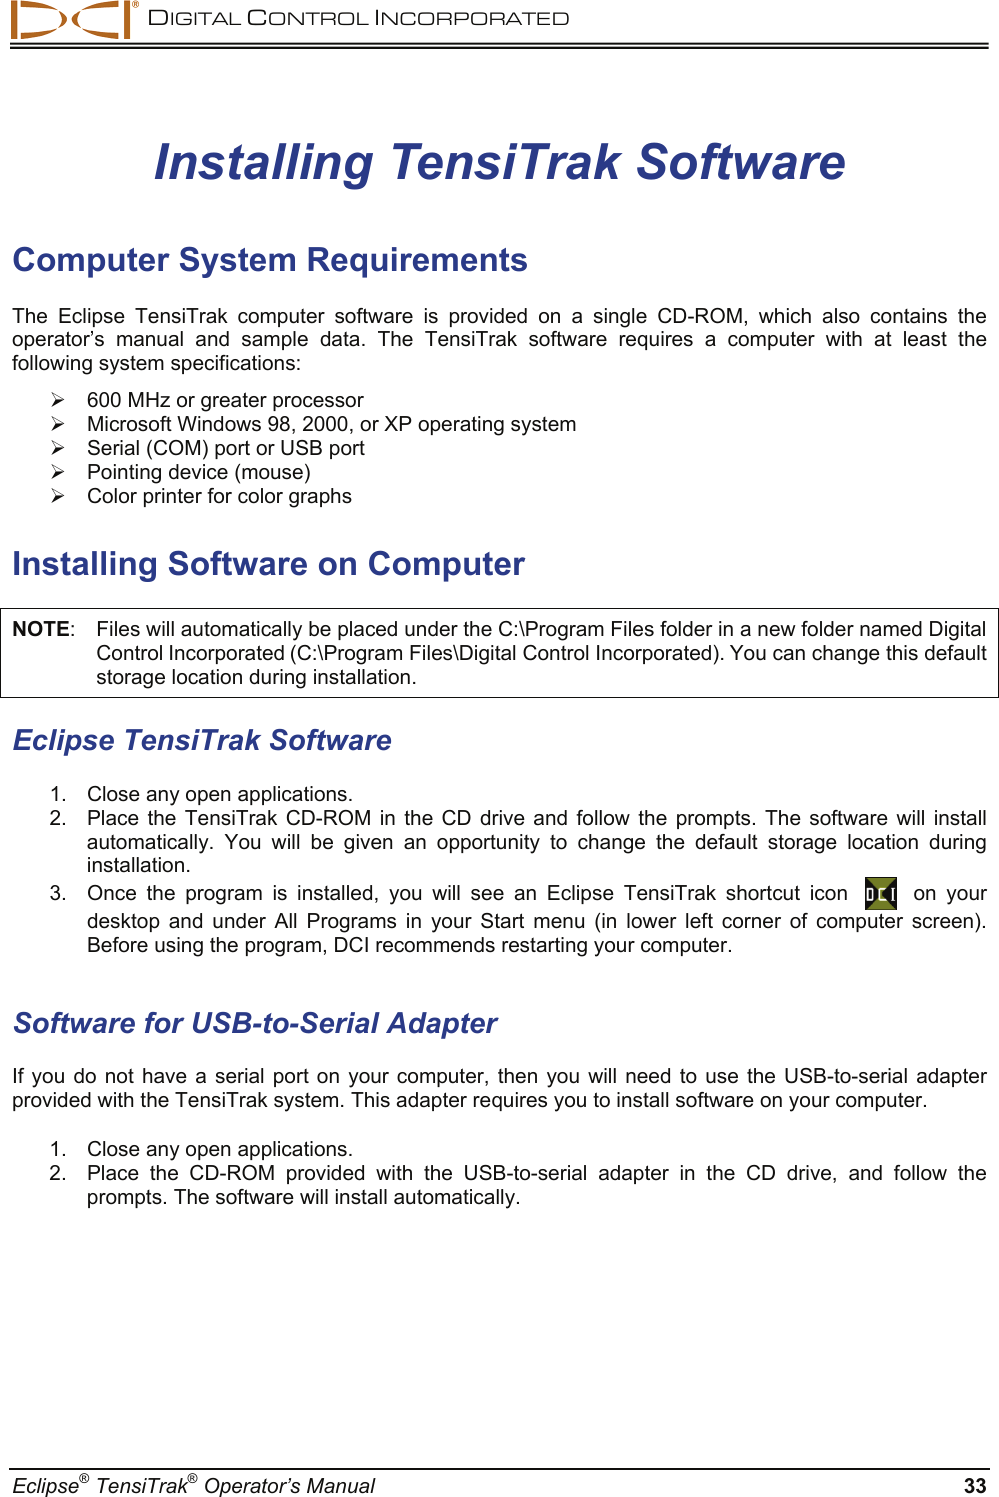  DIGITAL CONTROL INCORPORATED  Eclipse® TensiTrak® Operator’s Manual  33 Installing TensiTrak Software  Computer System Requirements The Eclipse TensiTrak computer software is provided on a single CD-ROM, which also contains the operator’s manual and sample data. The TensiTrak software requires a computer with at least the following system specifications: ¾  600 MHz or greater processor  ¾  Microsoft Windows 98, 2000, or XP operating system ¾  Serial (COM) port or USB port ¾  Pointing device (mouse)  ¾  Color printer for color graphs   Installing Software on Computer NOTE:  Files will automatically be placed under the C:\Program Files folder in a new folder named Digital Control Incorporated (C:\Program Files\Digital Control Incorporated). You can change this default storage location during installation. Eclipse TensiTrak Software  1.  Close any open applications.   2.  Place the TensiTrak CD-ROM in the CD drive and follow the prompts. The software will install automatically. You will be given an opportunity to change the default storage location during installation. 3.  Once the program is installed, you will see an Eclipse TensiTrak shortcut icon      on your desktop and under All Programs in your Start menu (in lower left corner of computer screen). Before using the program, DCI recommends restarting your computer.  Software for USB-to-Serial Adapter  If you do not have a serial port on your computer, then you will need to use the USB-to-serial adapter provided with the TensiTrak system. This adapter requires you to install software on your computer.  1.  Close any open applications.   2.  Place the CD-ROM provided with the USB-to-serial adapter in the CD drive, and follow the prompts. The software will install automatically. 